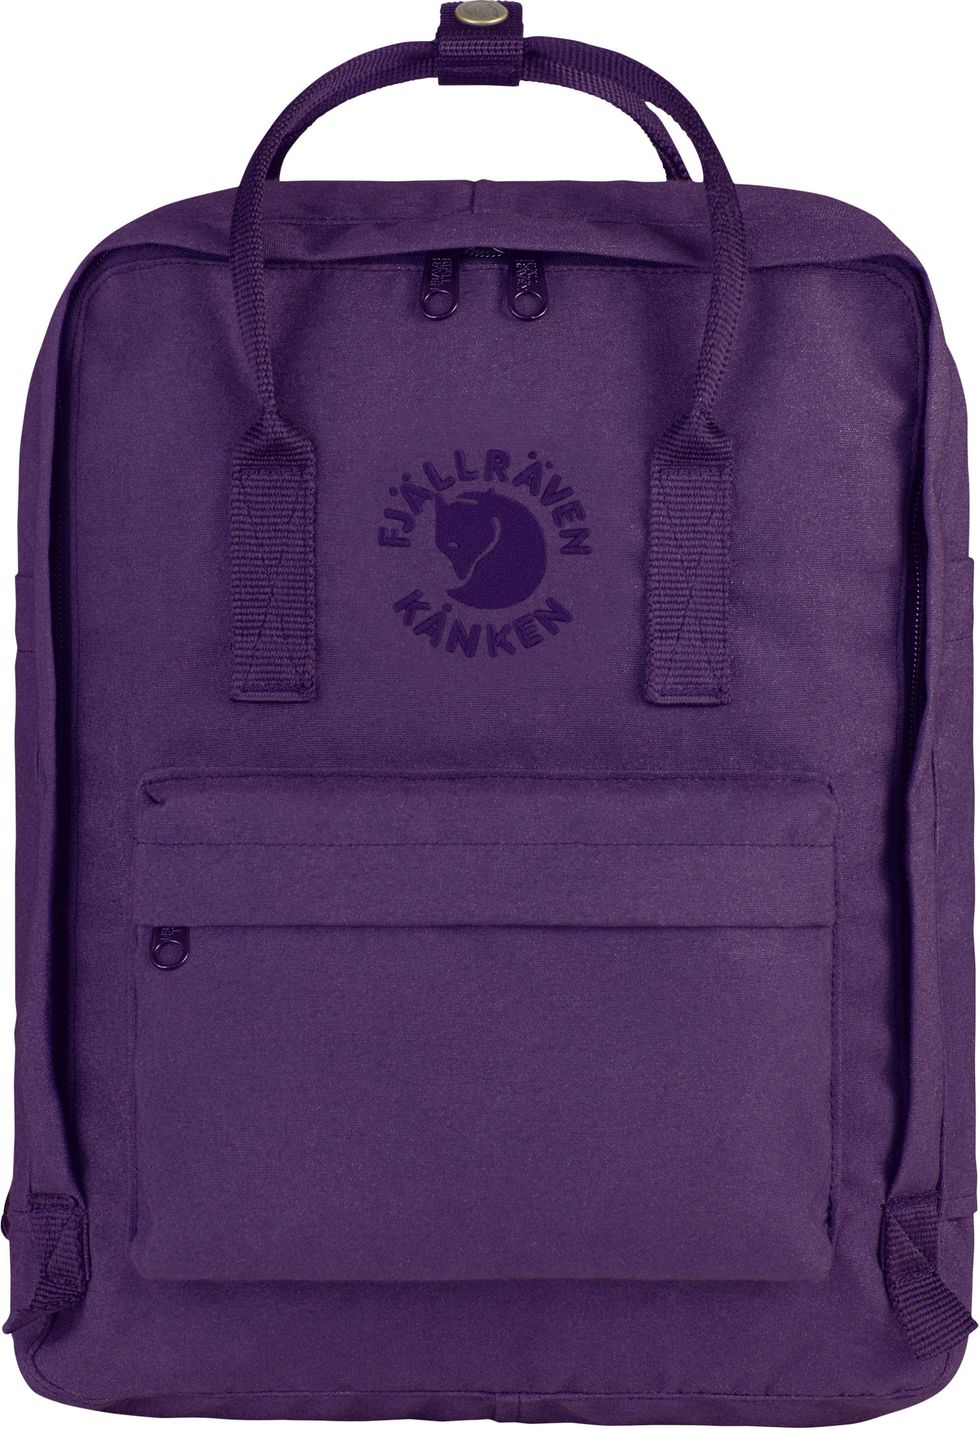 Bag, Purple, Violet, Hand luggage, Luggage and bags, Backpack, Baggage, Suitcase, Laptop bag, Fashion accessory, 